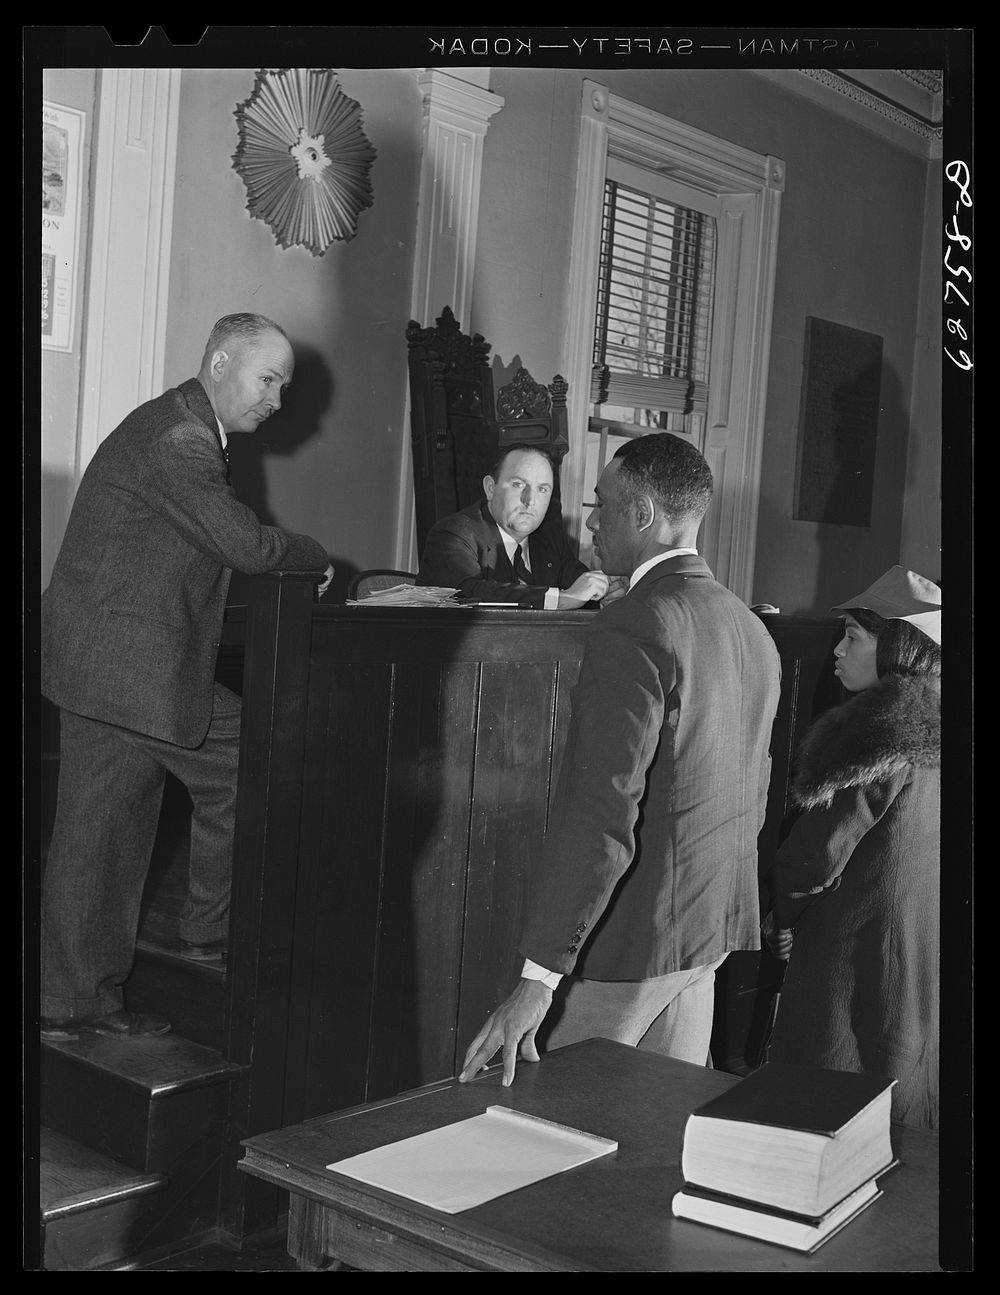 Court day. Rustburg, Virginia. Sourced from the Library of Congress.